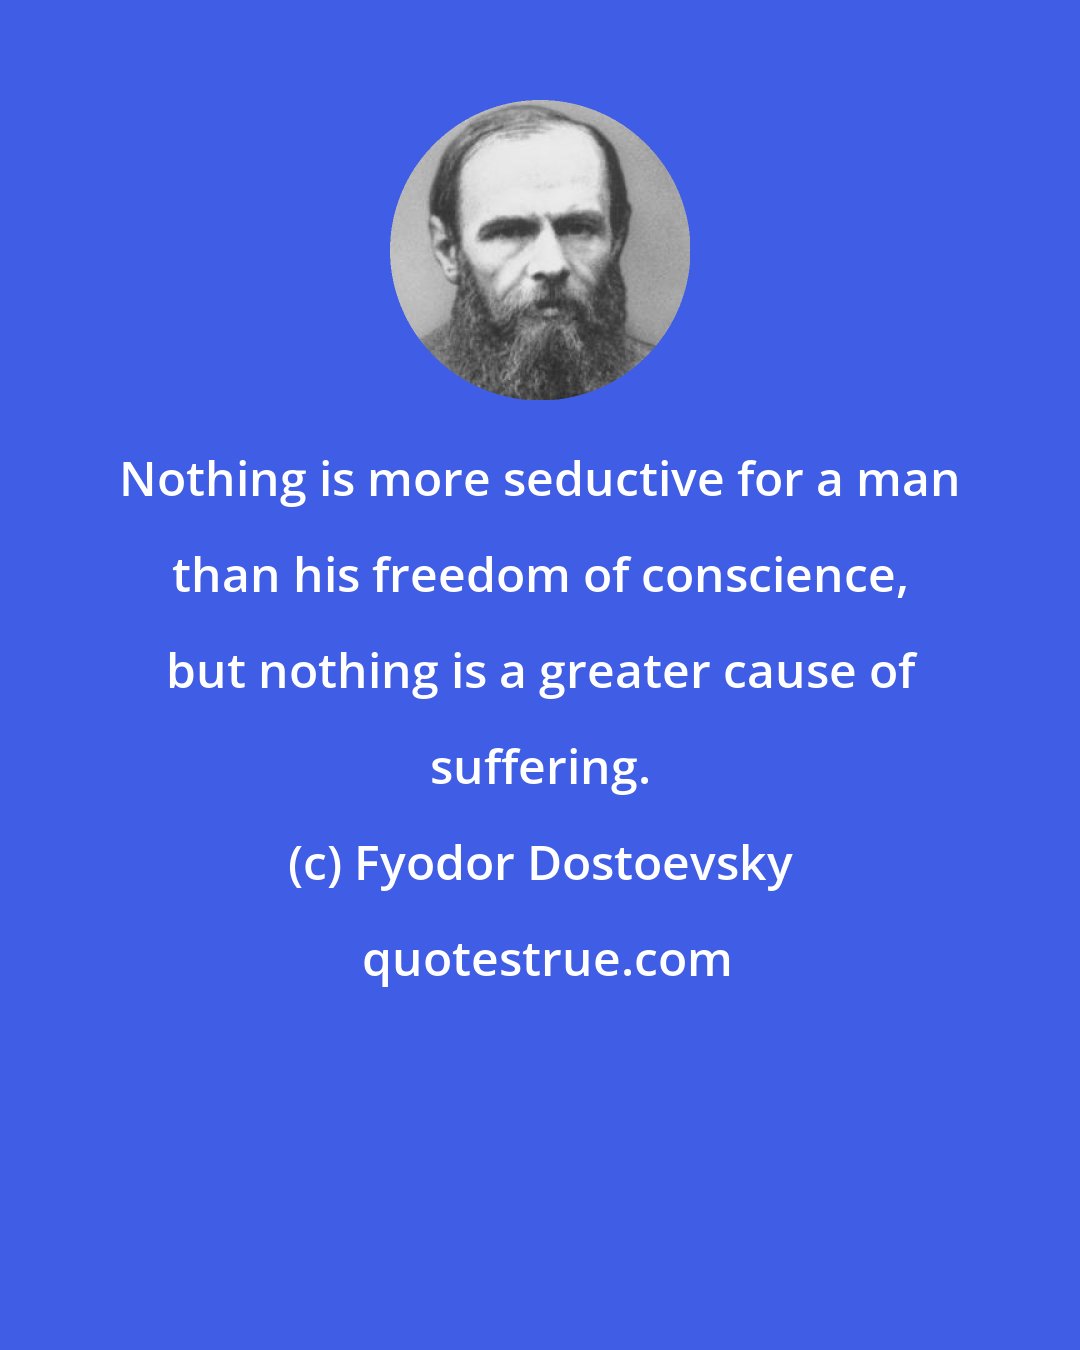 Fyodor Dostoevsky: Nothing is more seductive for a man than his freedom of conscience, but nothing is a greater cause of suffering.